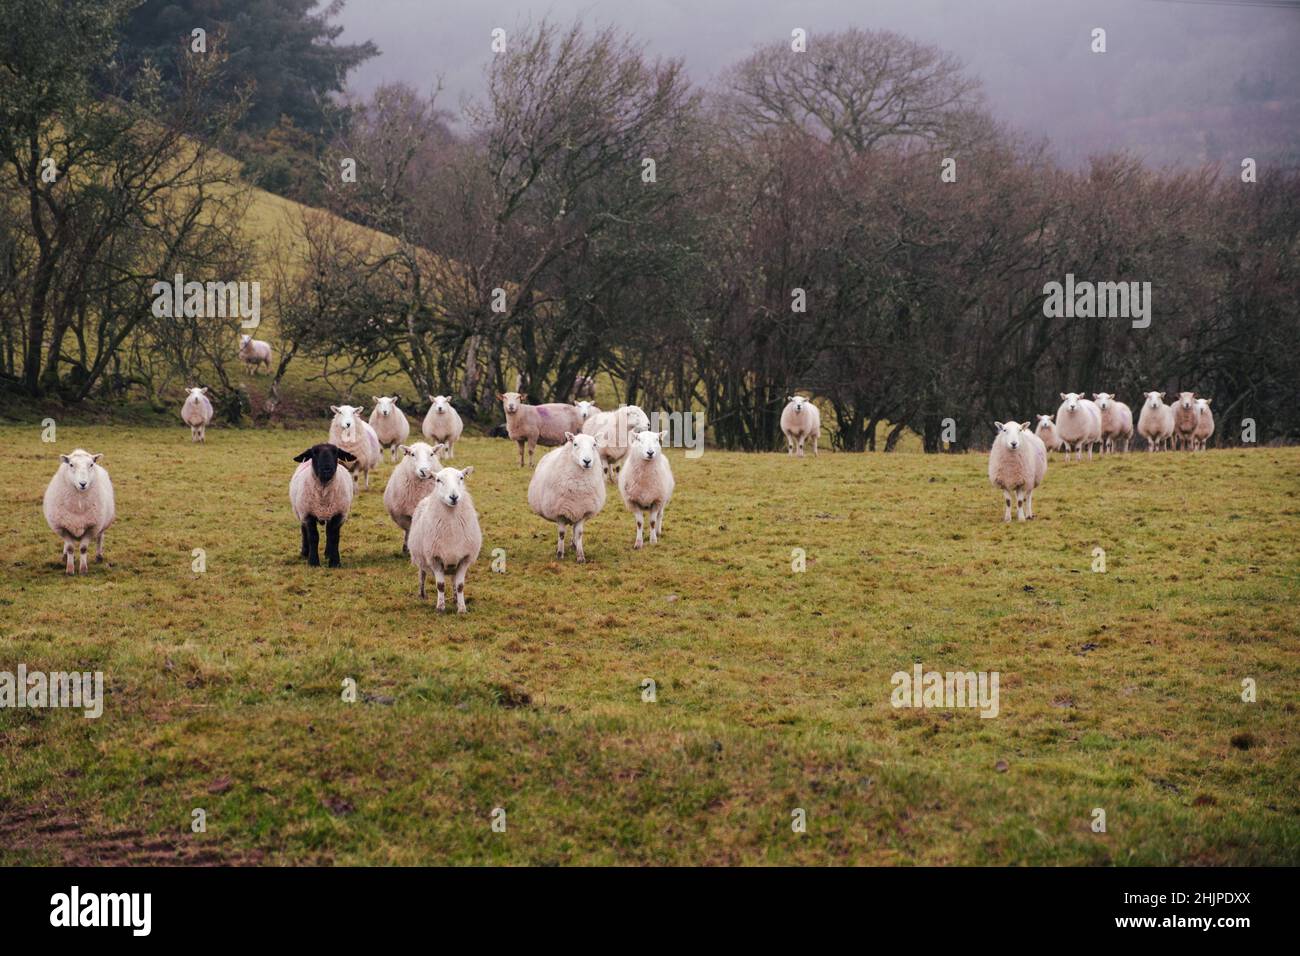 Sheep in Welsh countryside Stock Photo